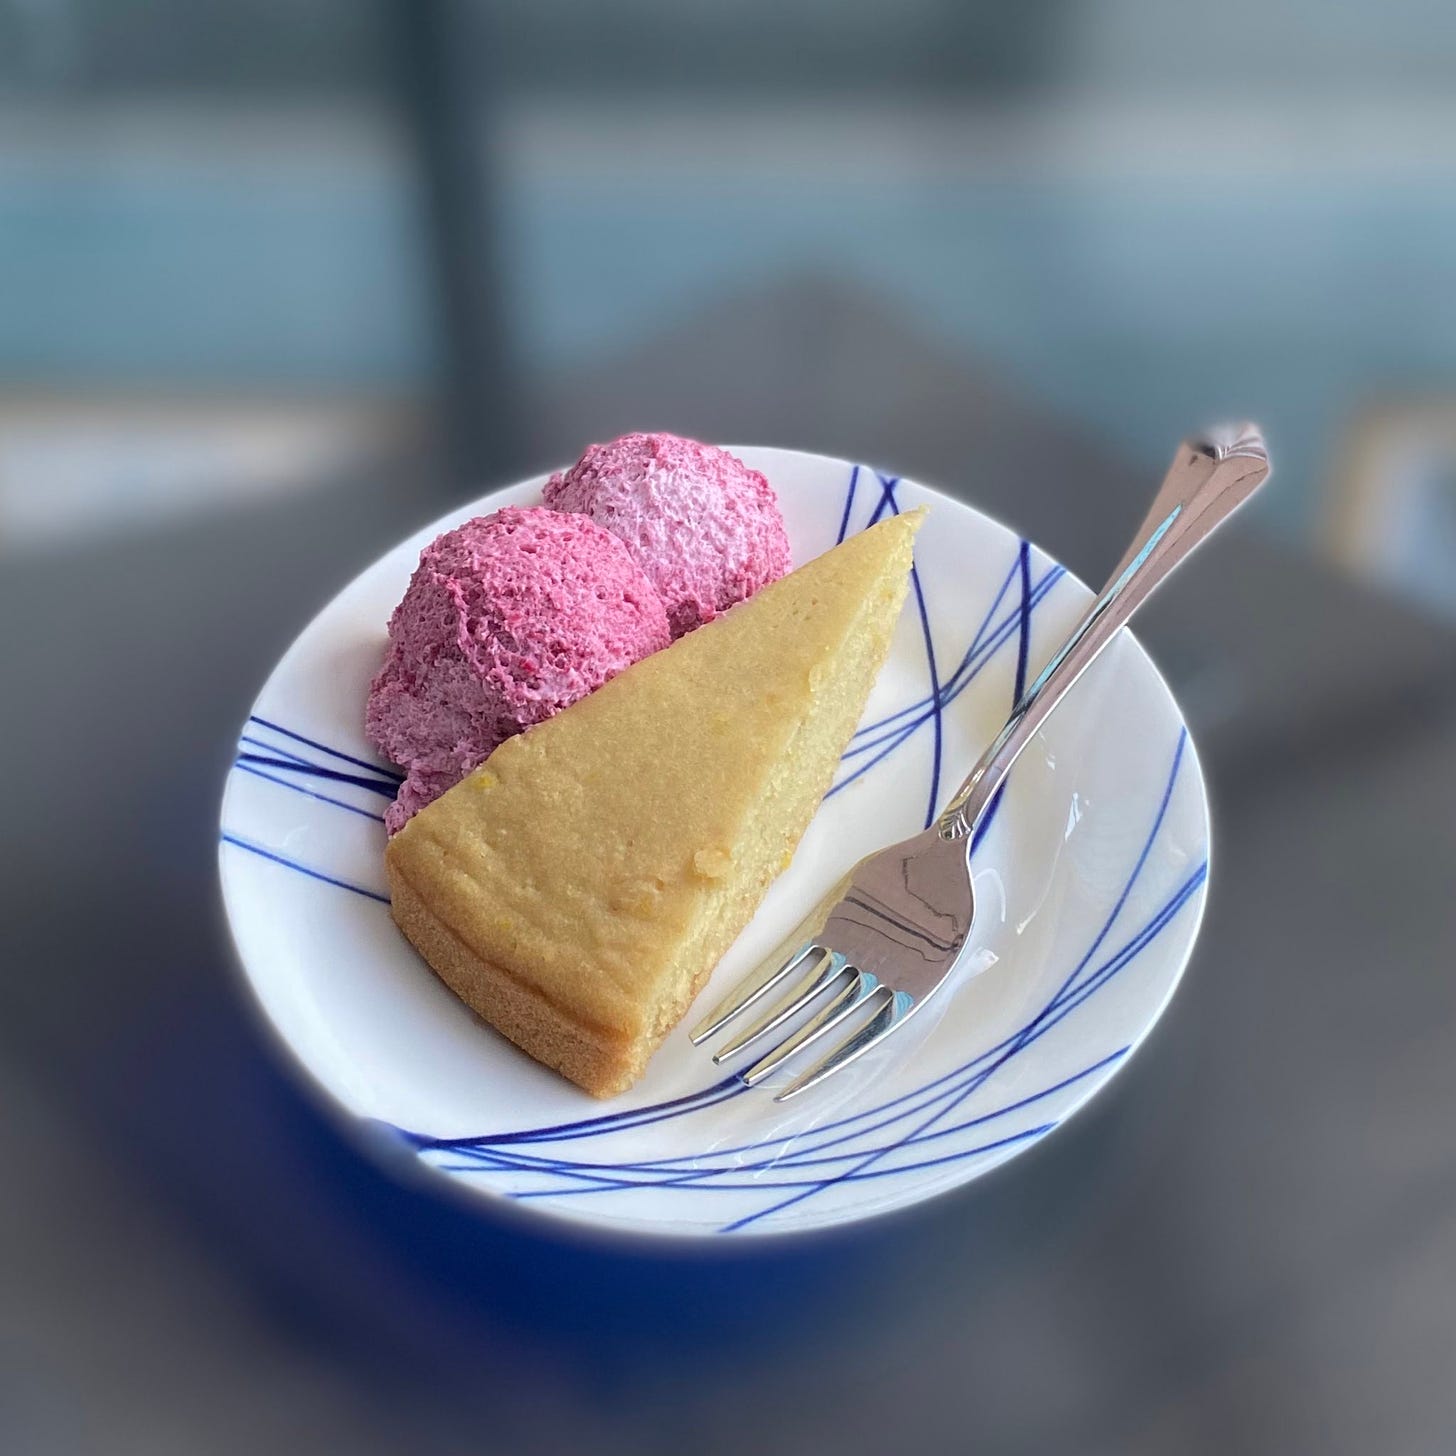 A small blue and white plate with a slice of olive oil cake, a fork in front of it. On the other side of the cake are two small scoops of deep pink strawberry Bavarian cream.